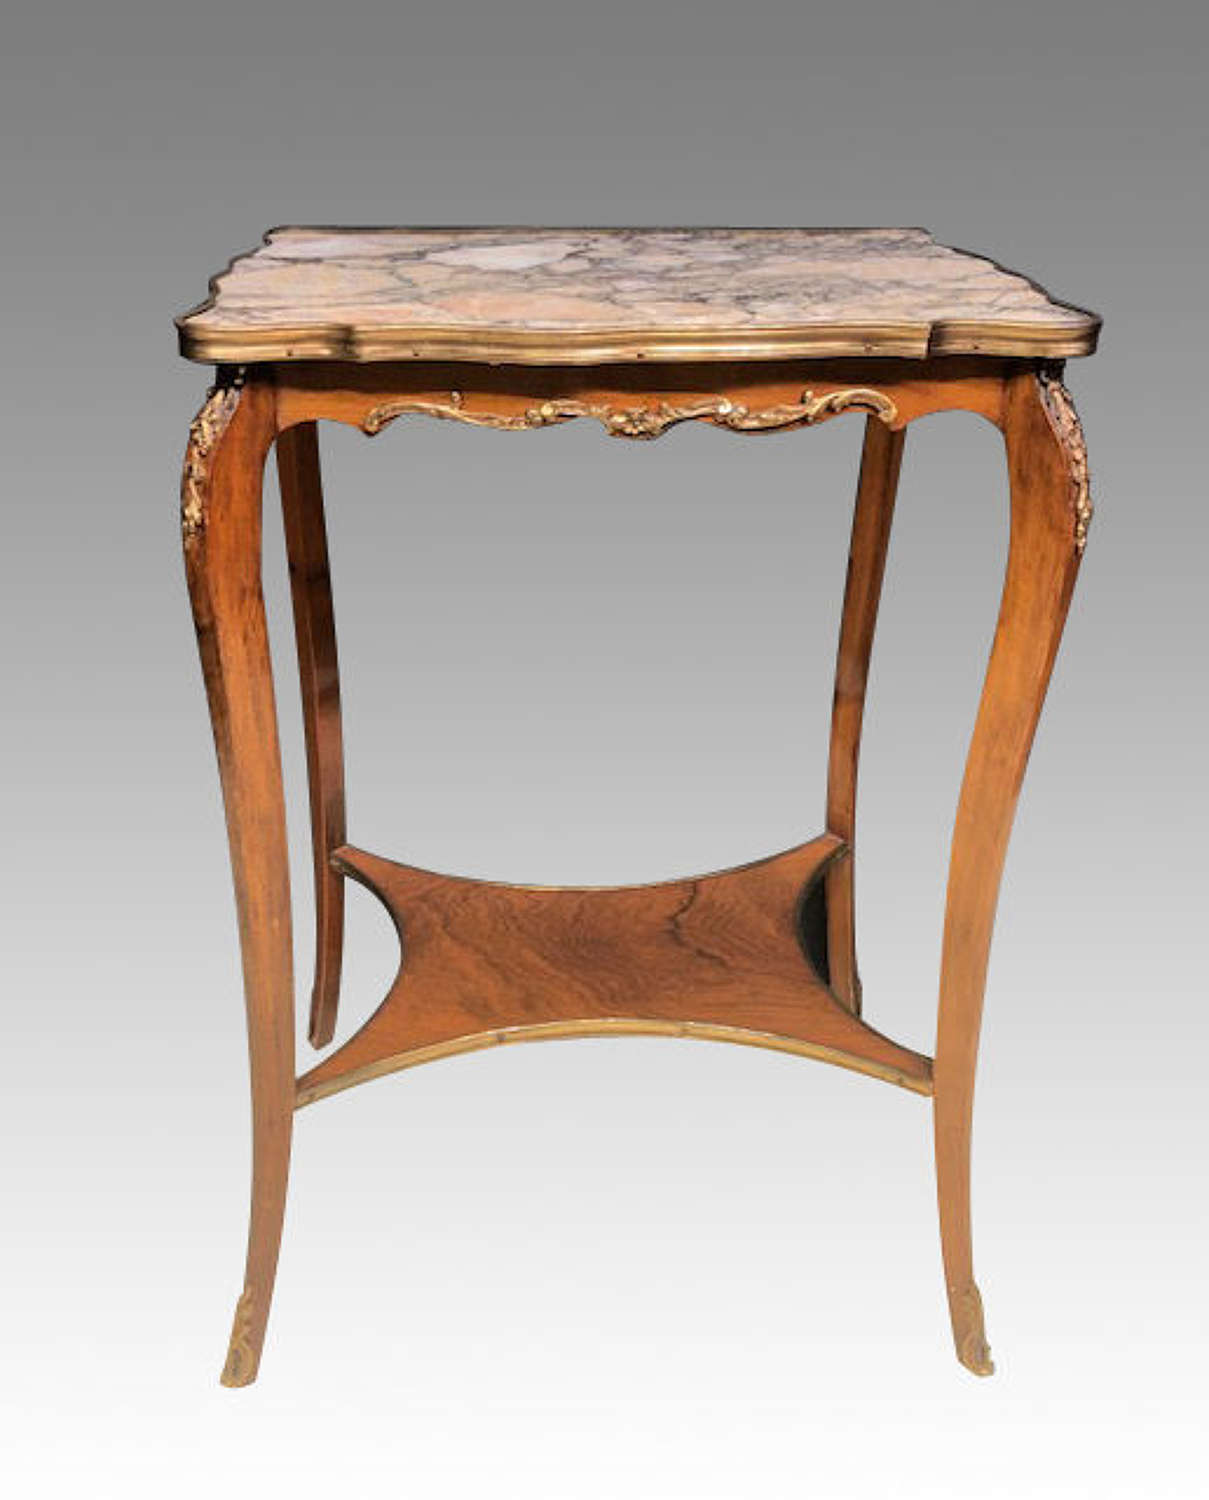 19th century marble top lamp table.